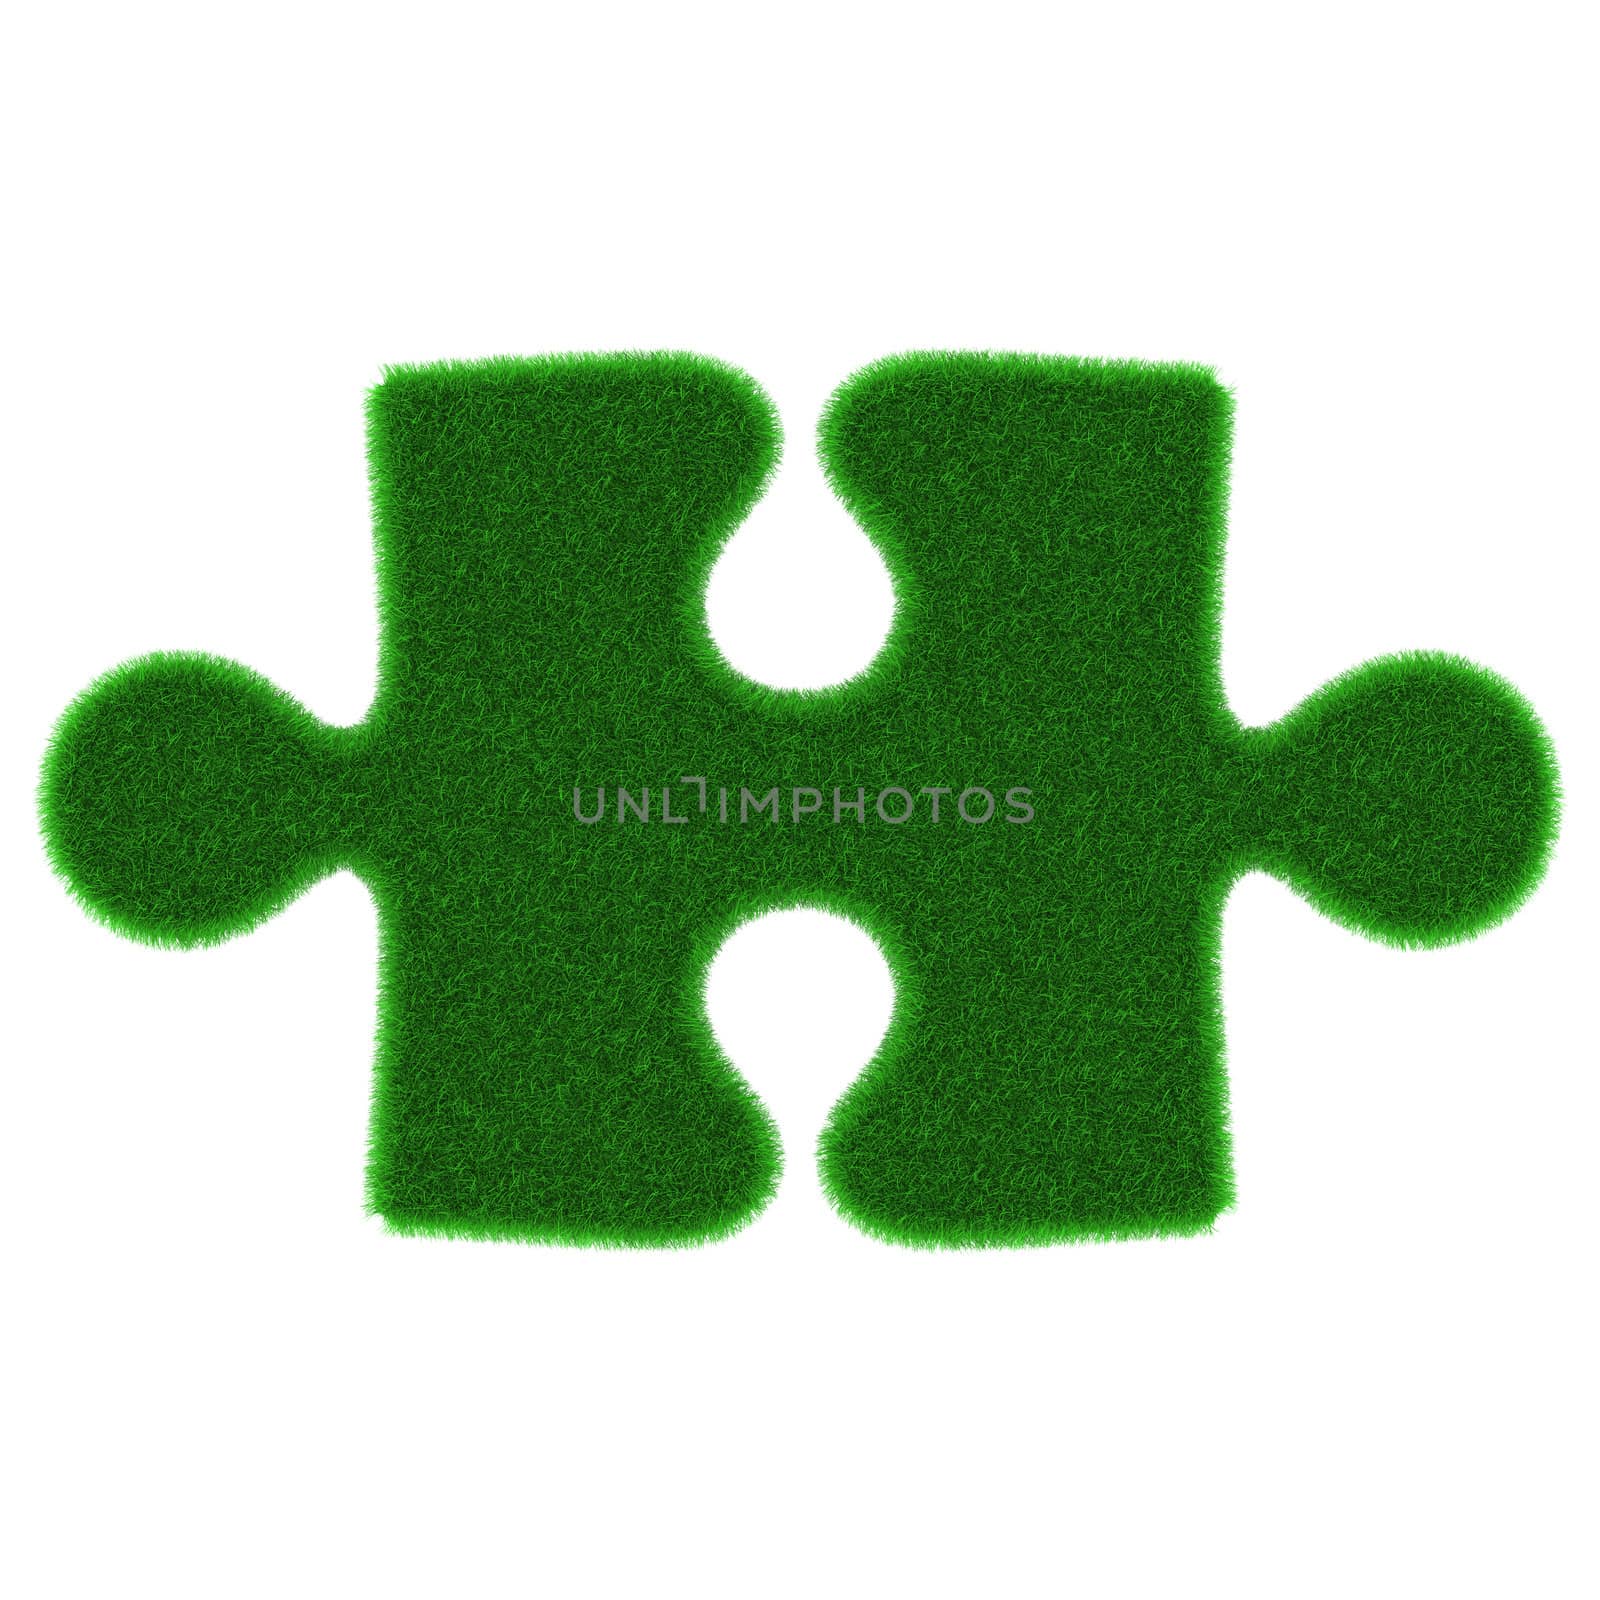 Green puzzle piece made of grass isolated on white background